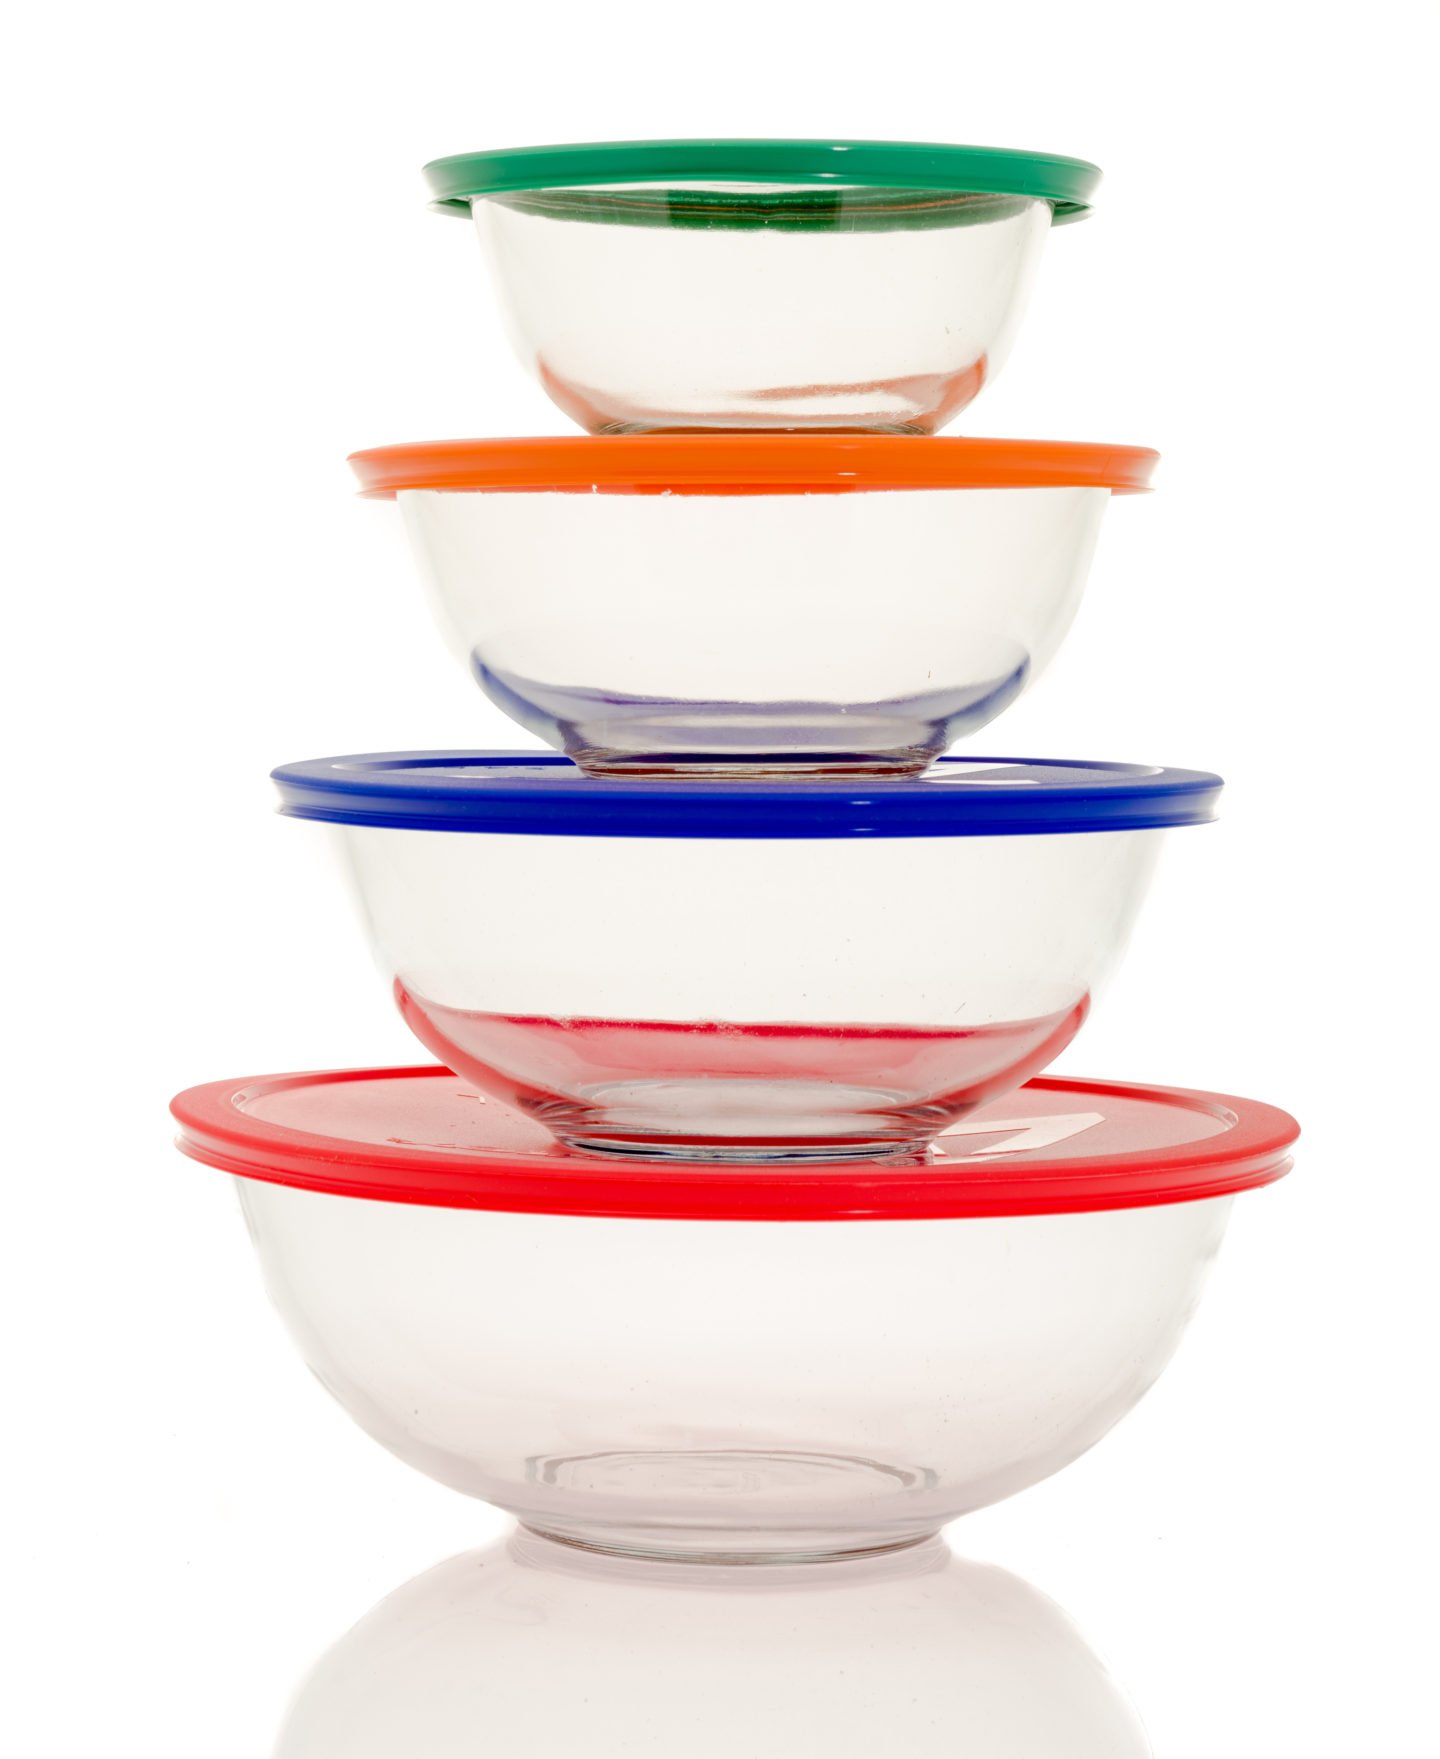 Pyrex Glass Bowls With Silicon Covers